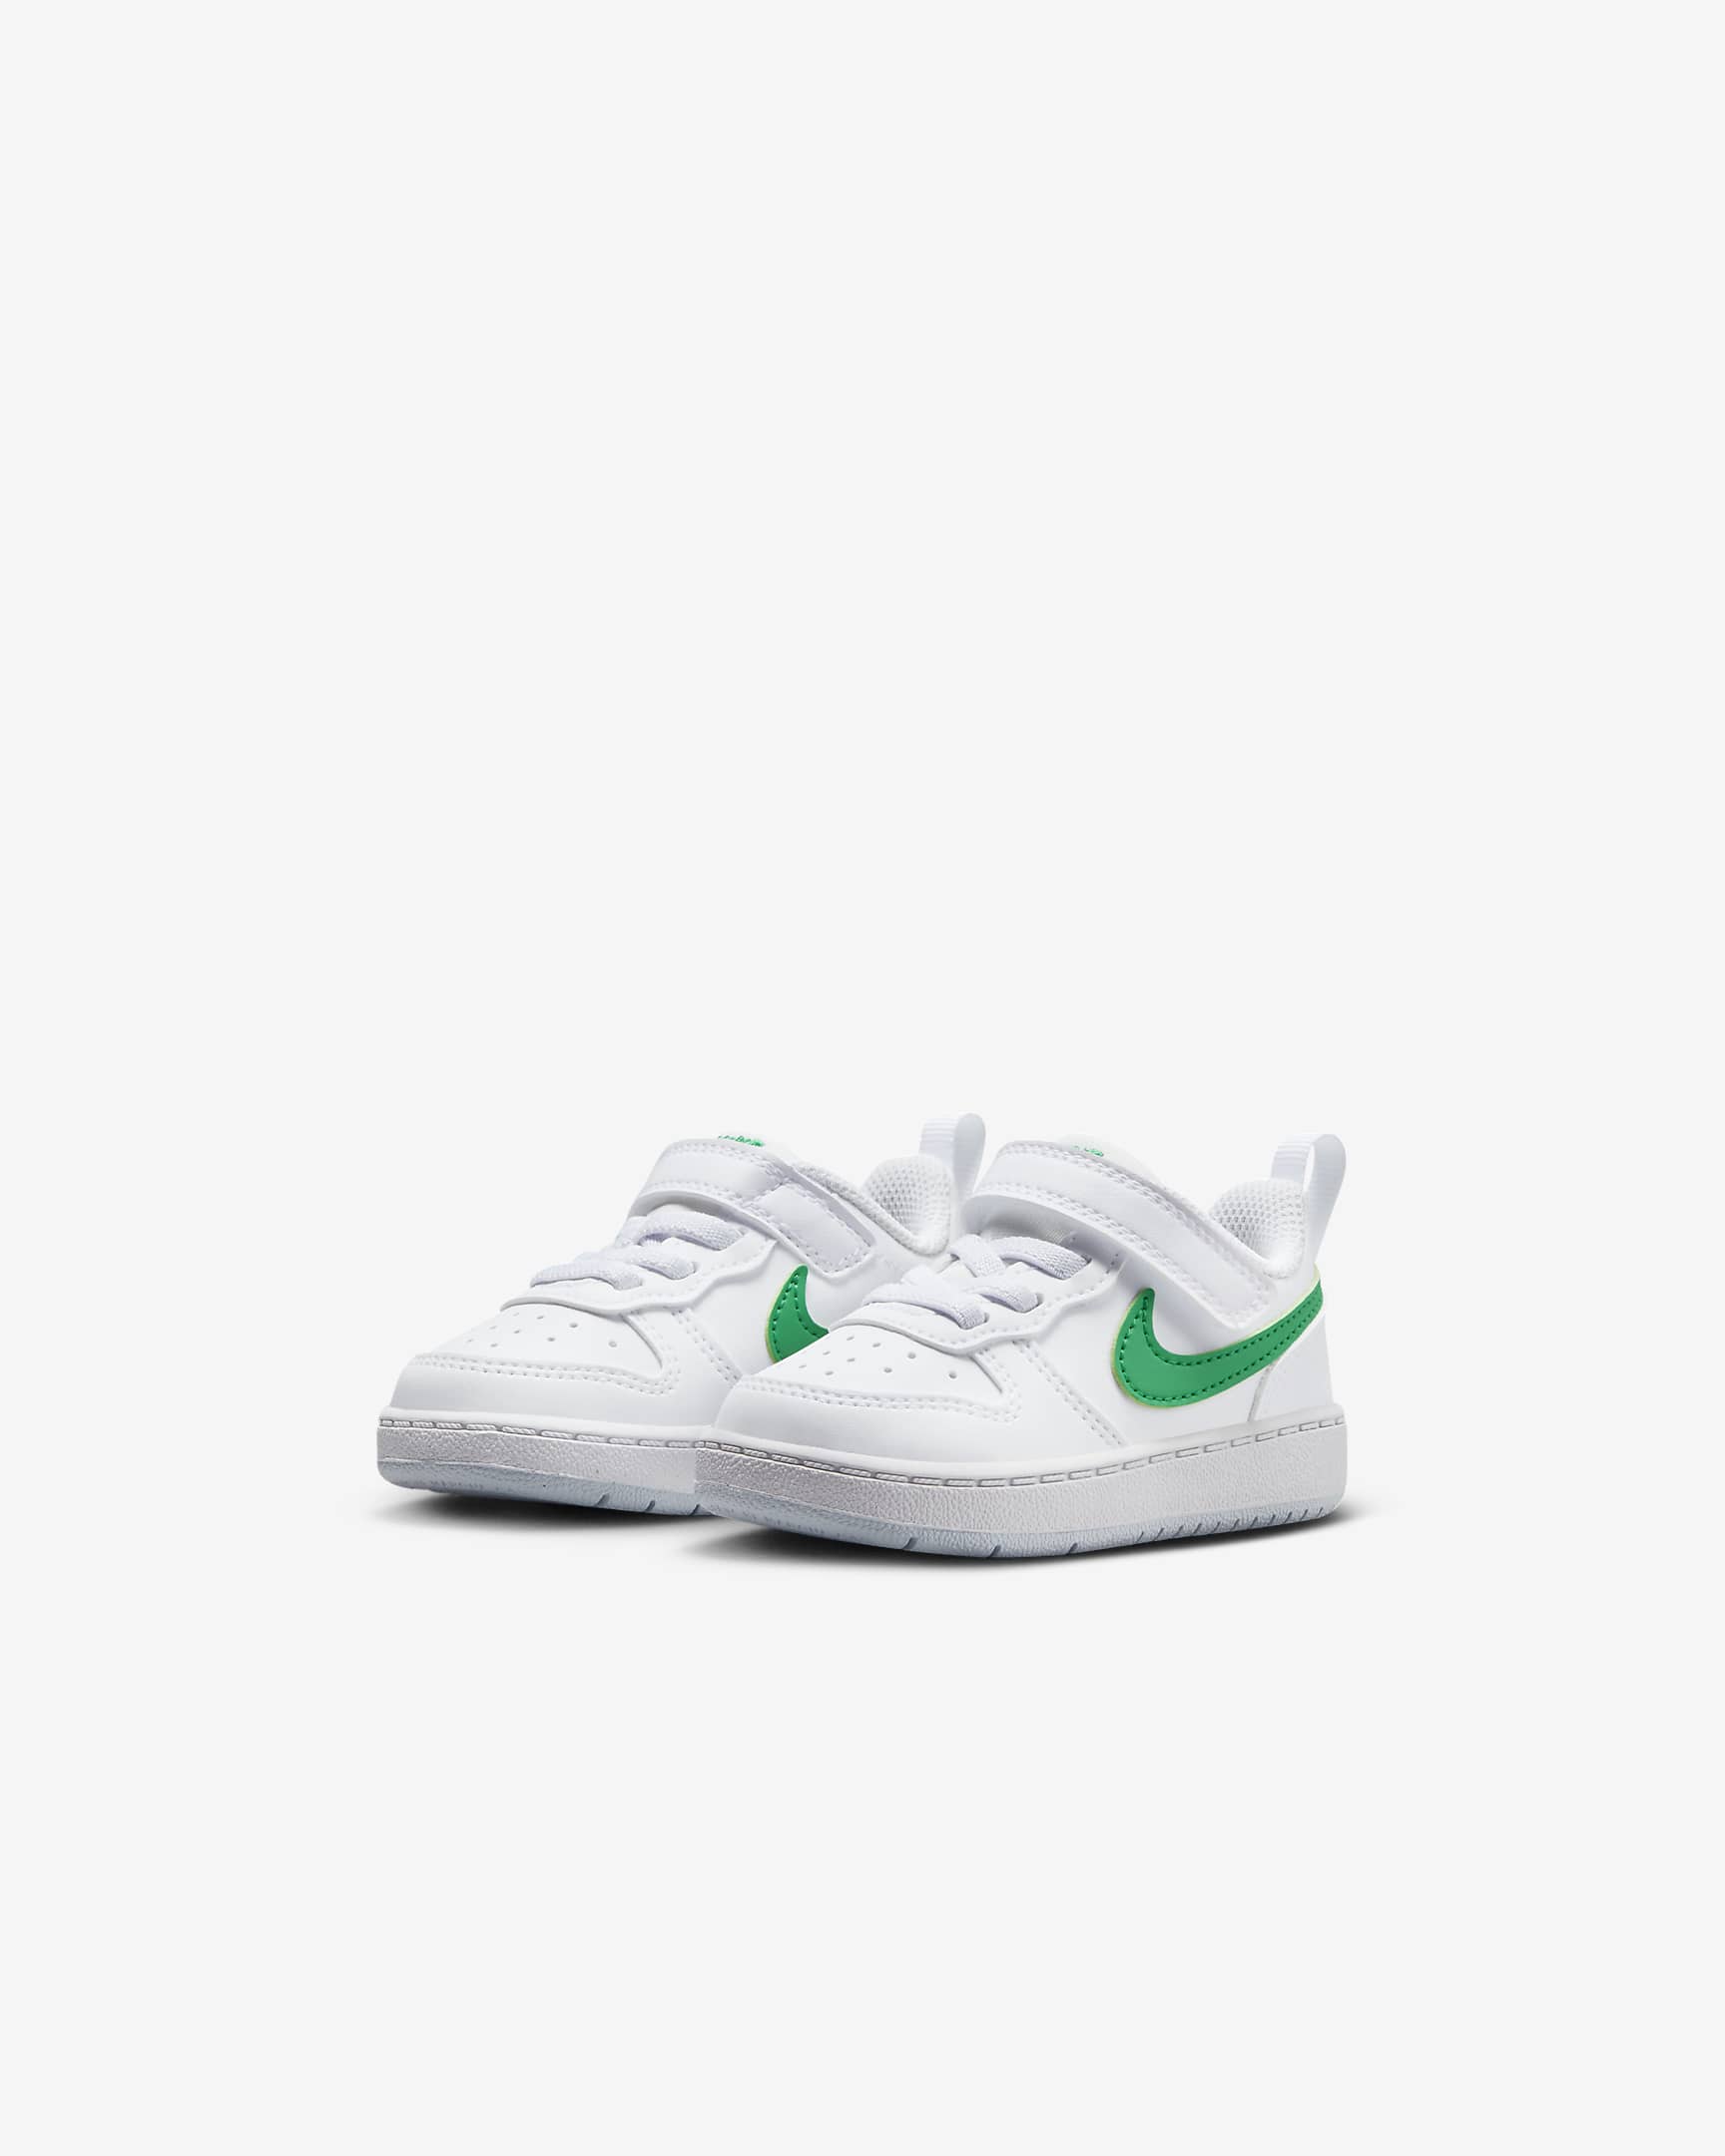 Nike Court Borough Low Recraft Baby/Toddler Shoes. Nike CH